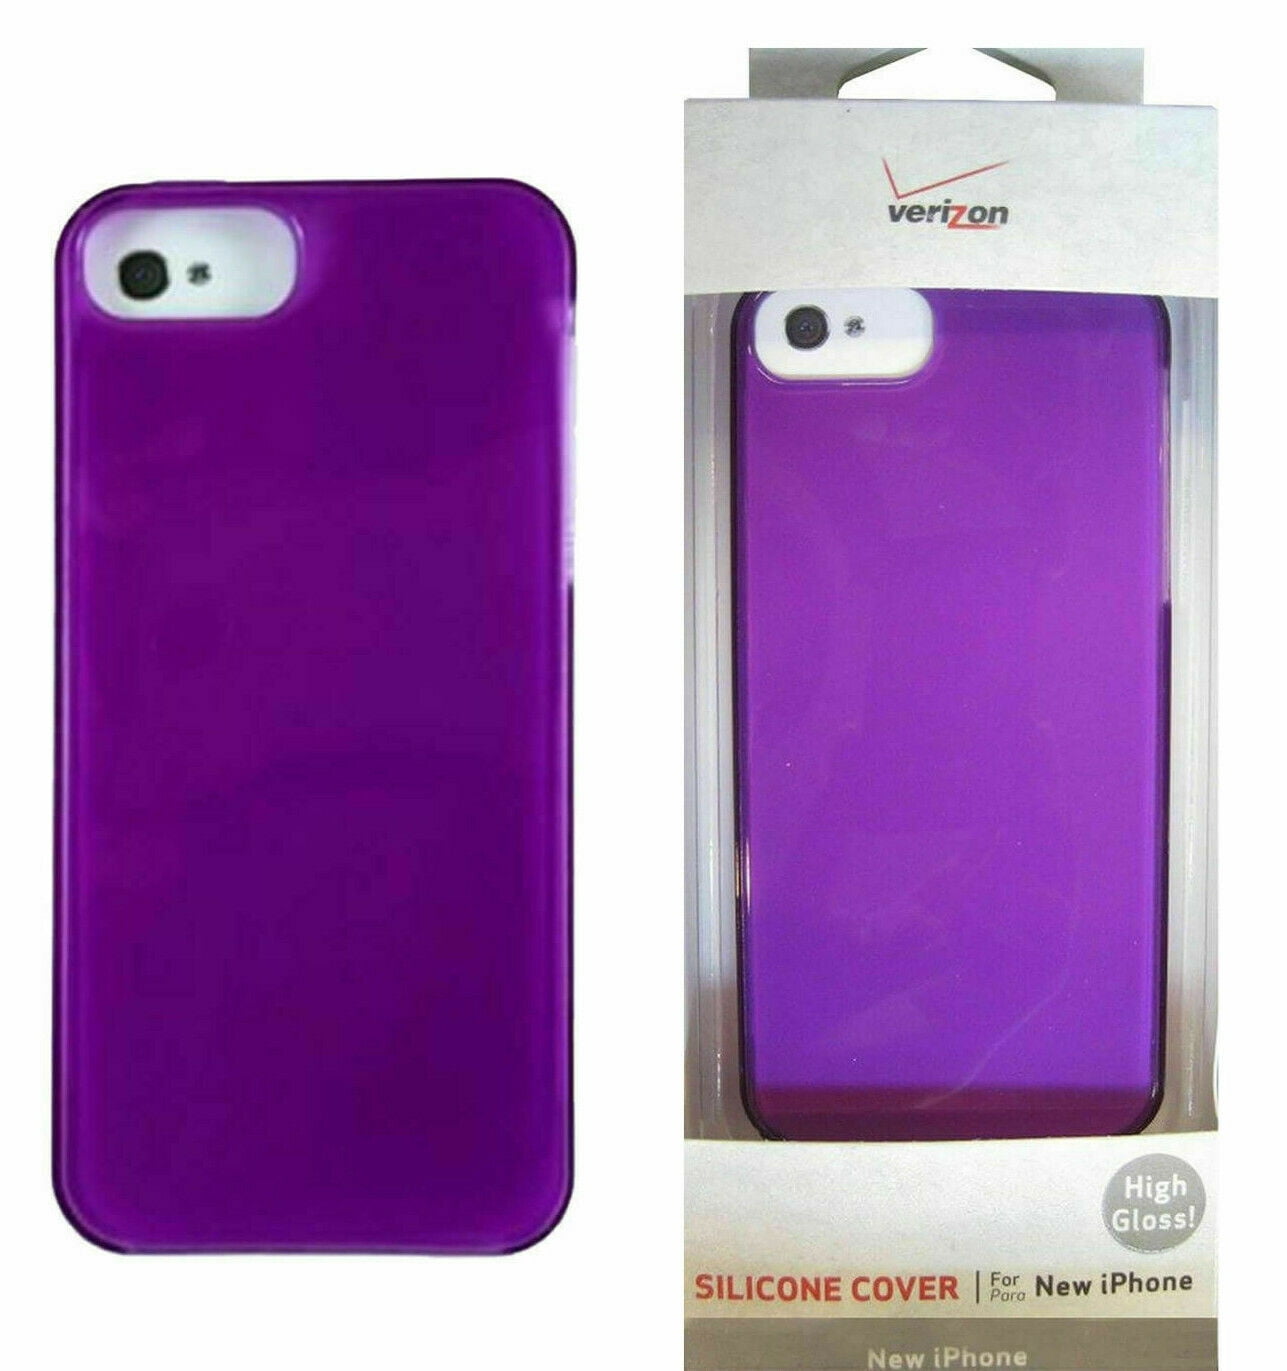 LOT OF 2 High Gloss Cover for Apple iPhone 5/5S (Purple) - Walmart.com